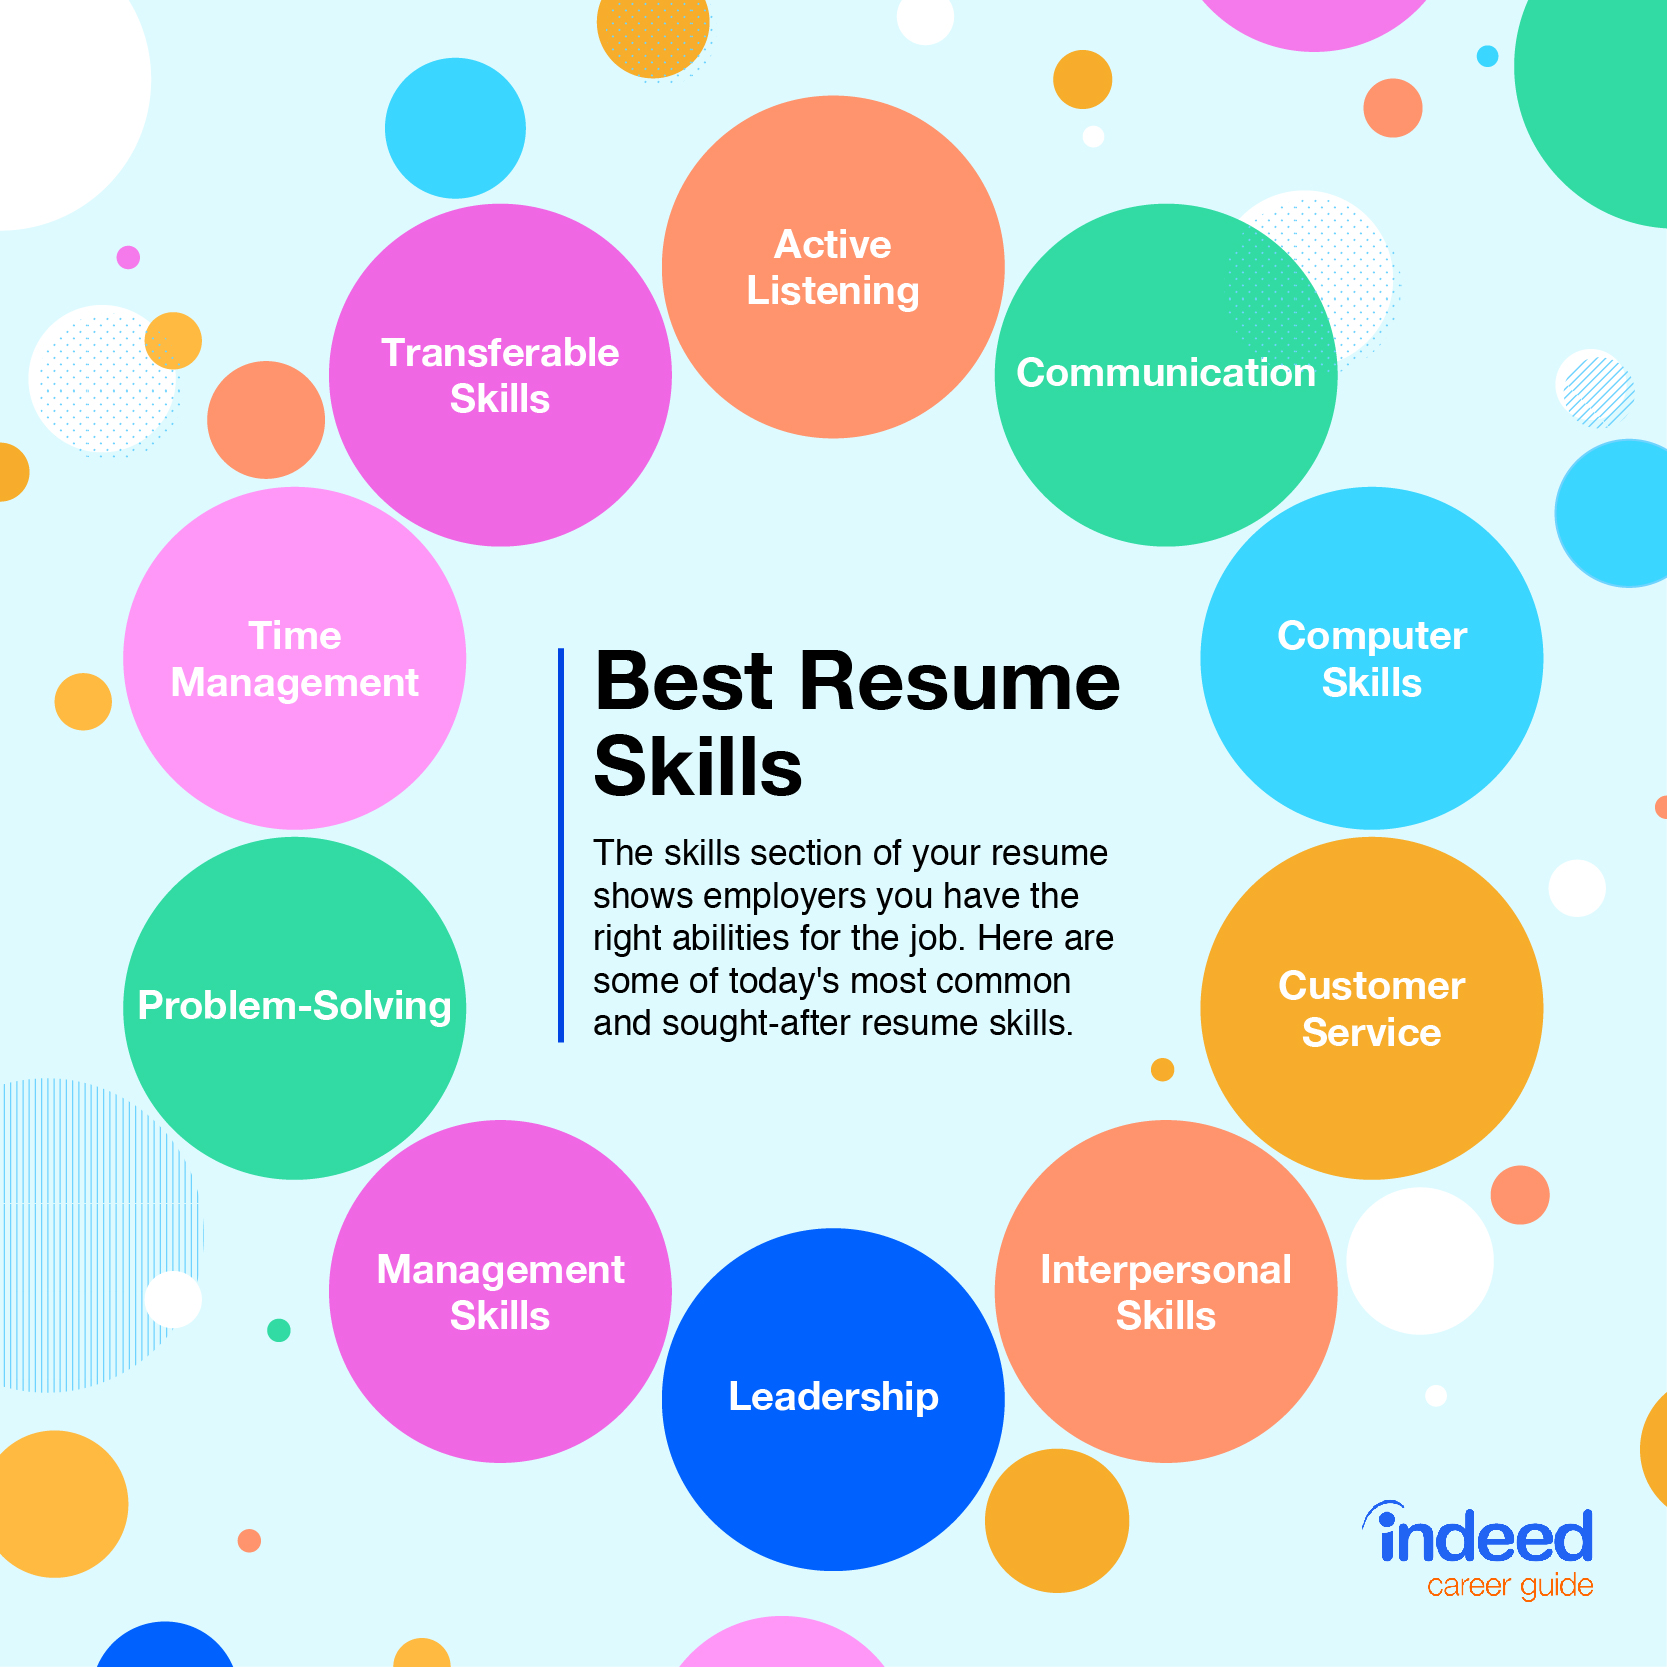 what's another word for skills on resume